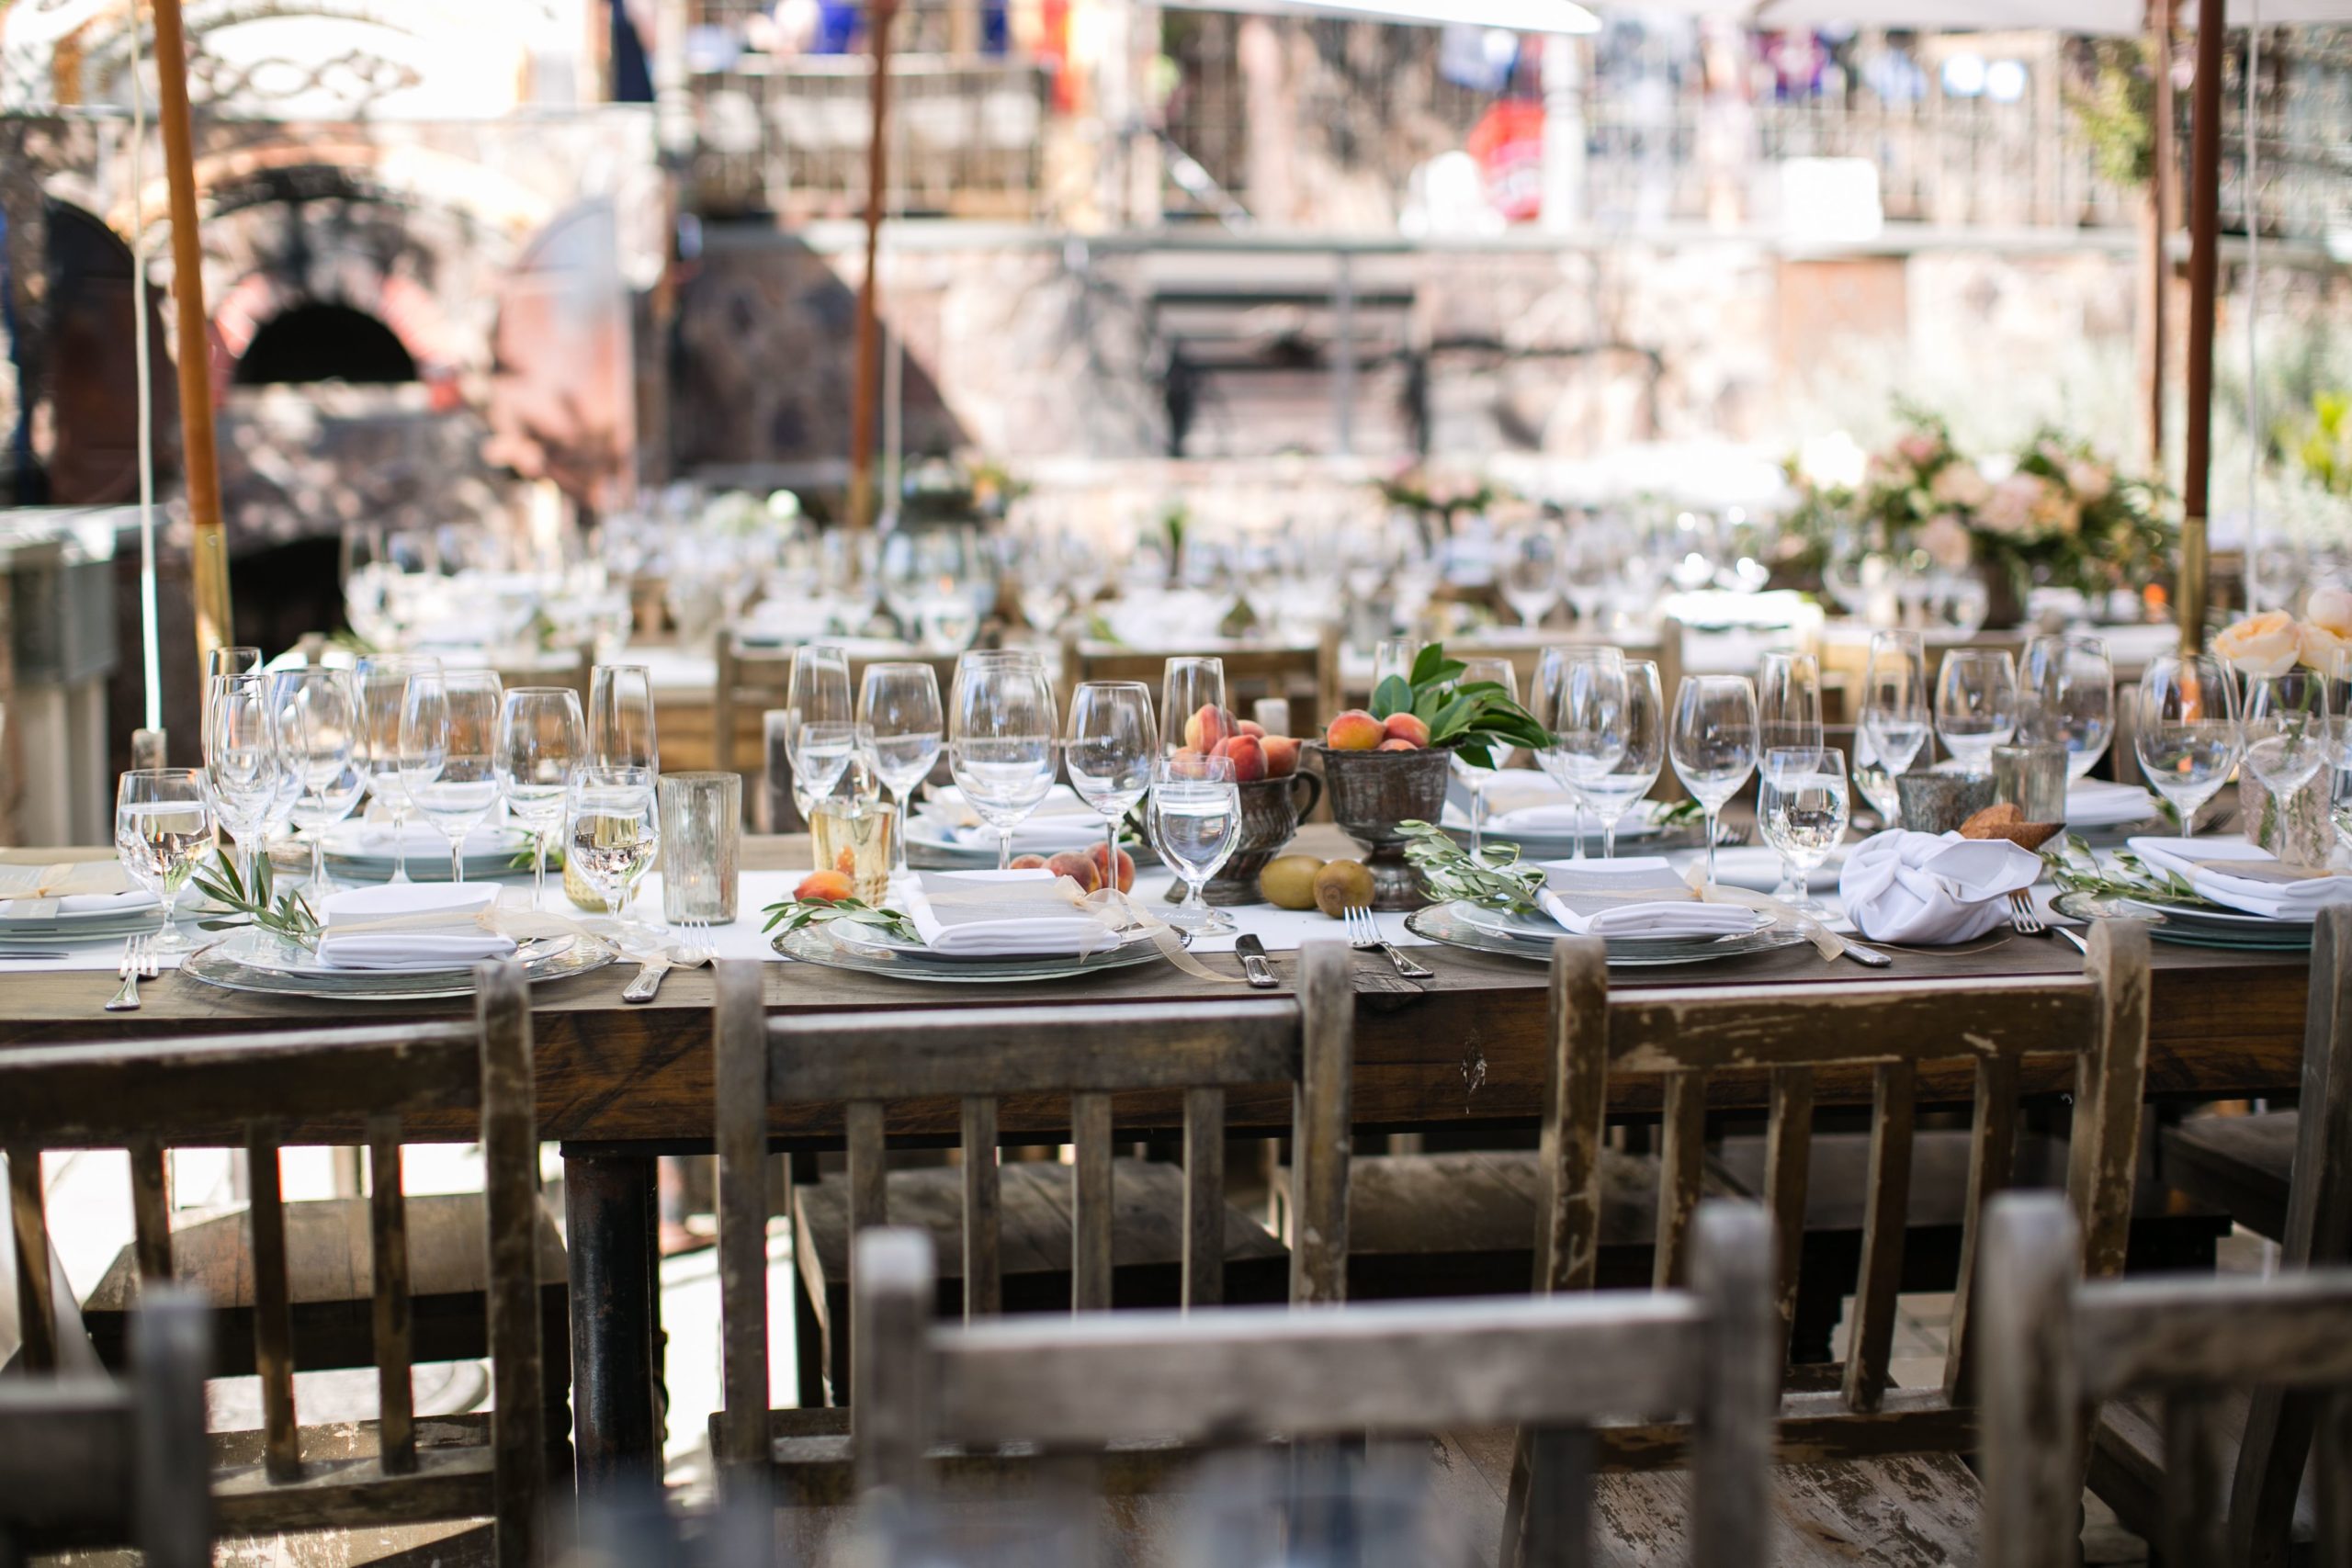 Take Wedding Decor to the Next Level with Table Linens